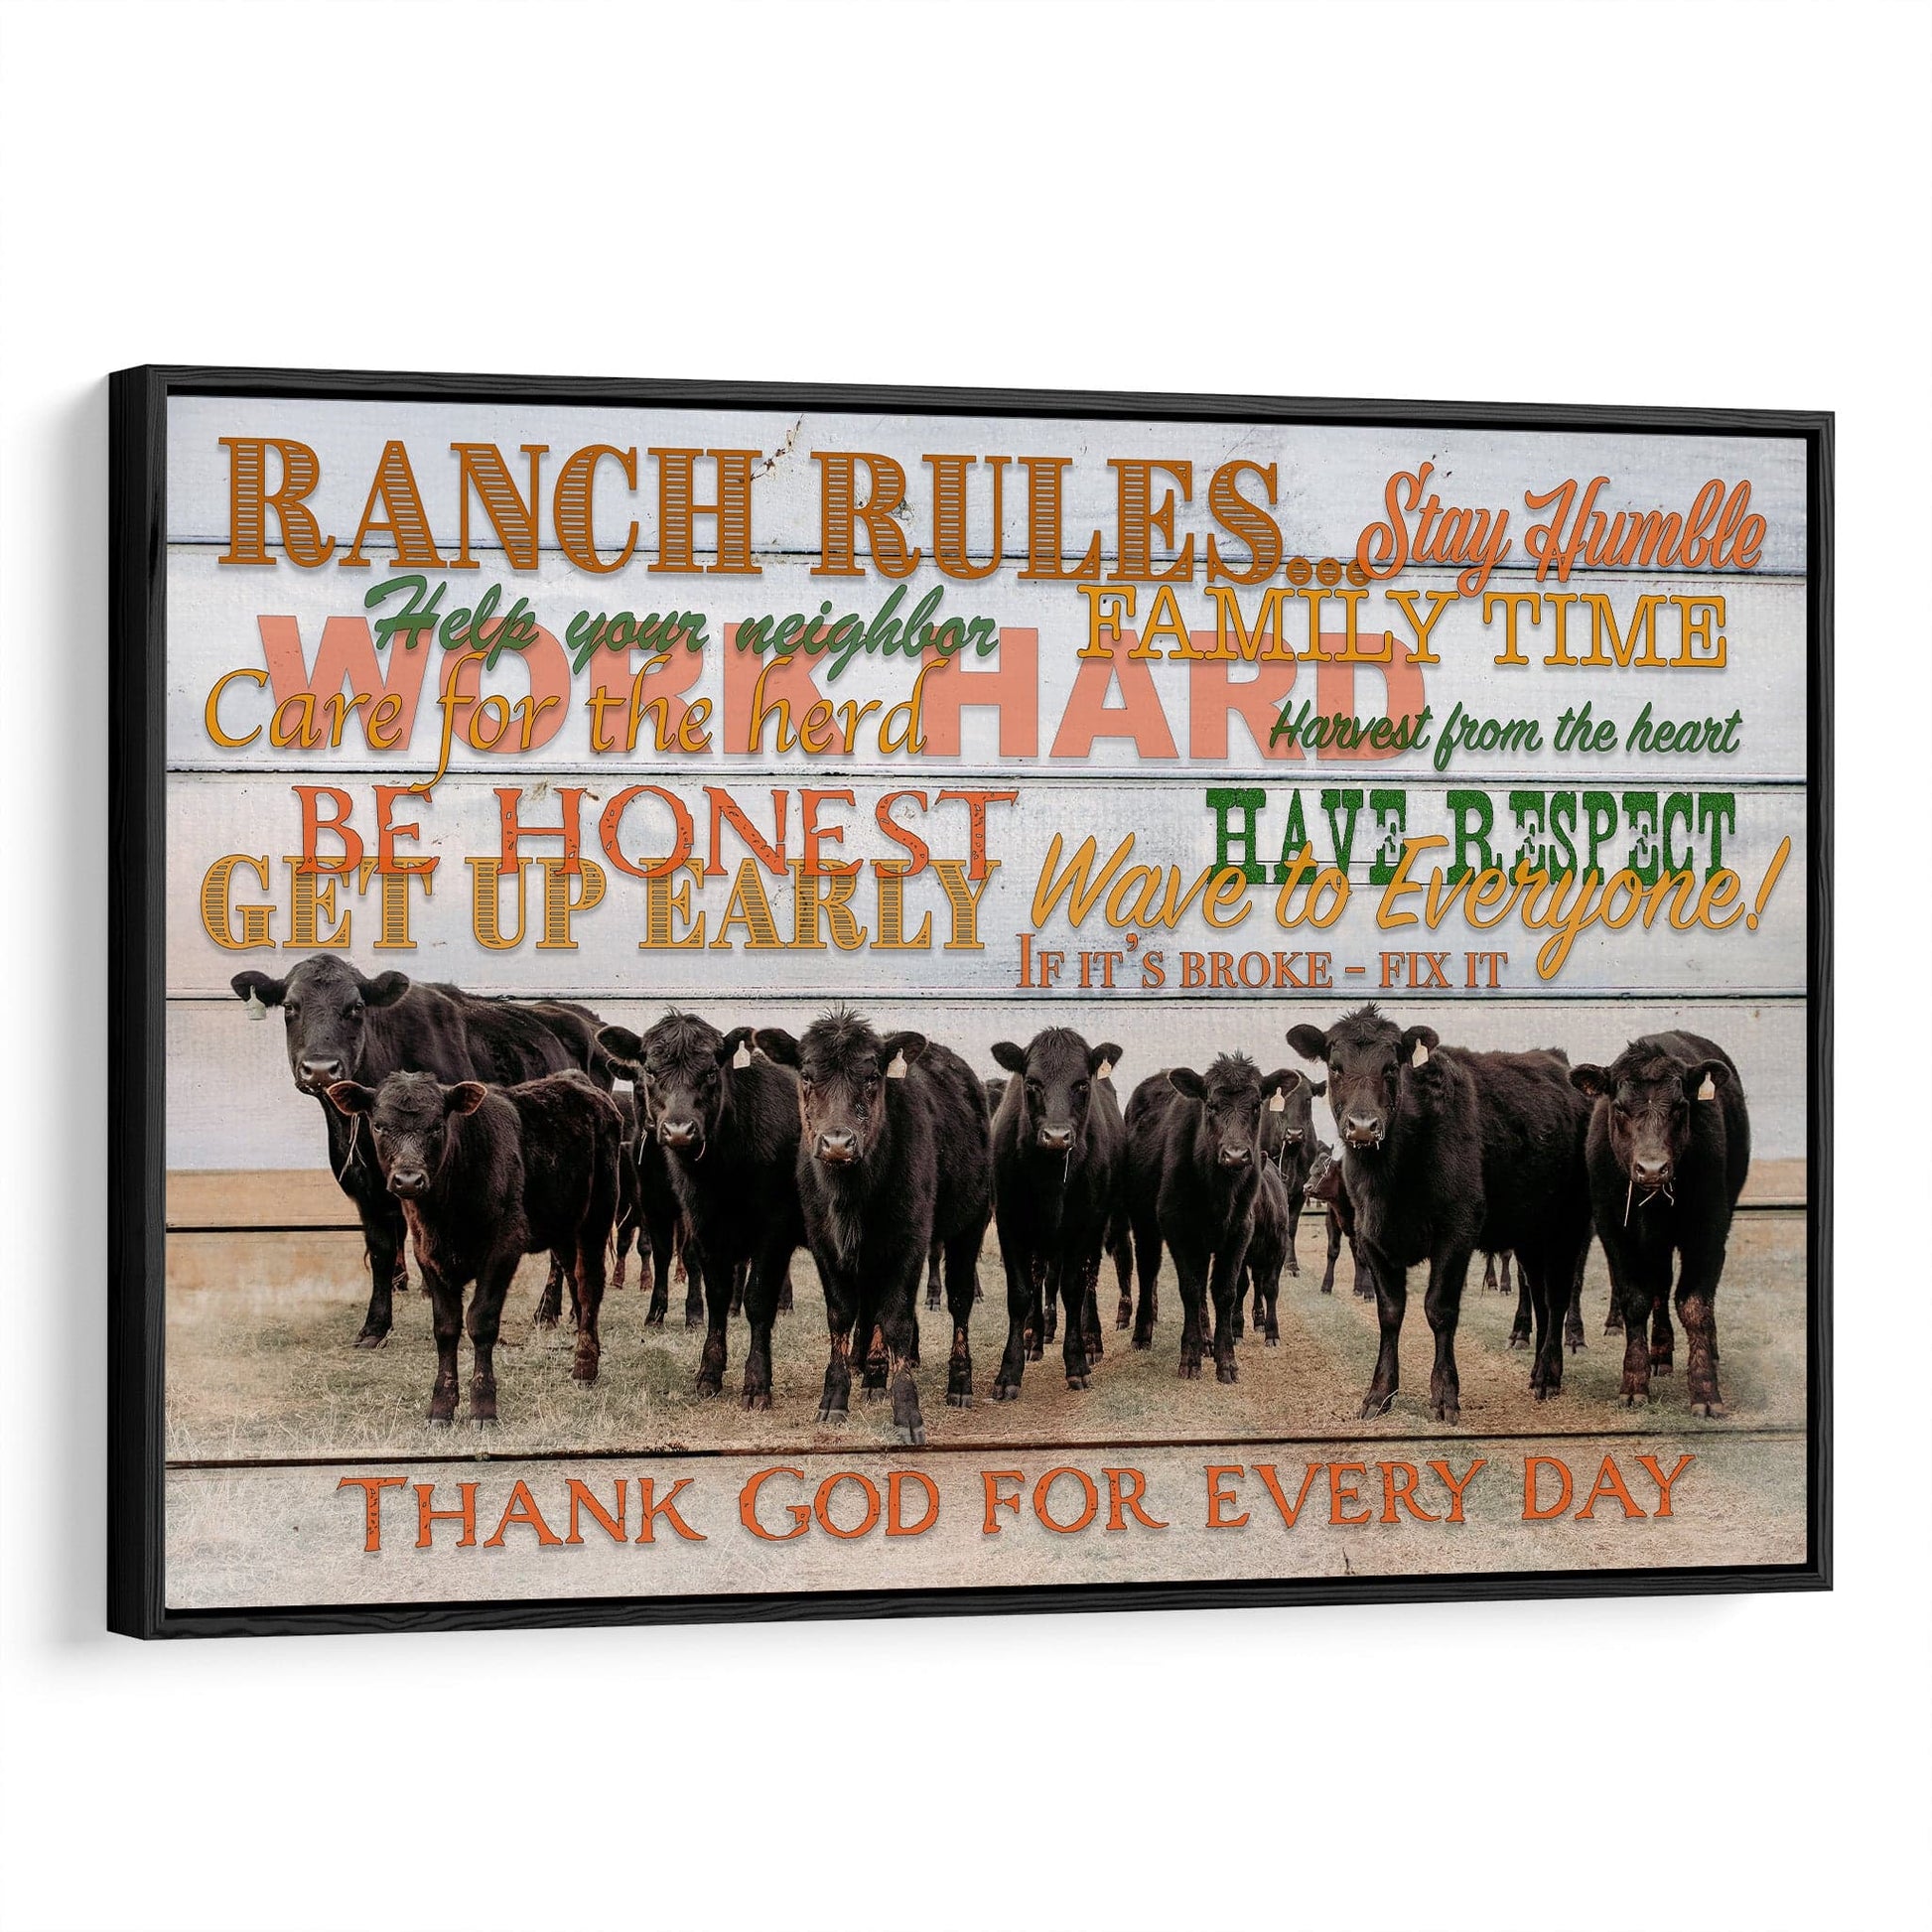 Ranch Rules Inspirational Quote about Farming and Ranching Canvas-Black Frame / 12 x 18 Inches Wall Art Teri James Photography